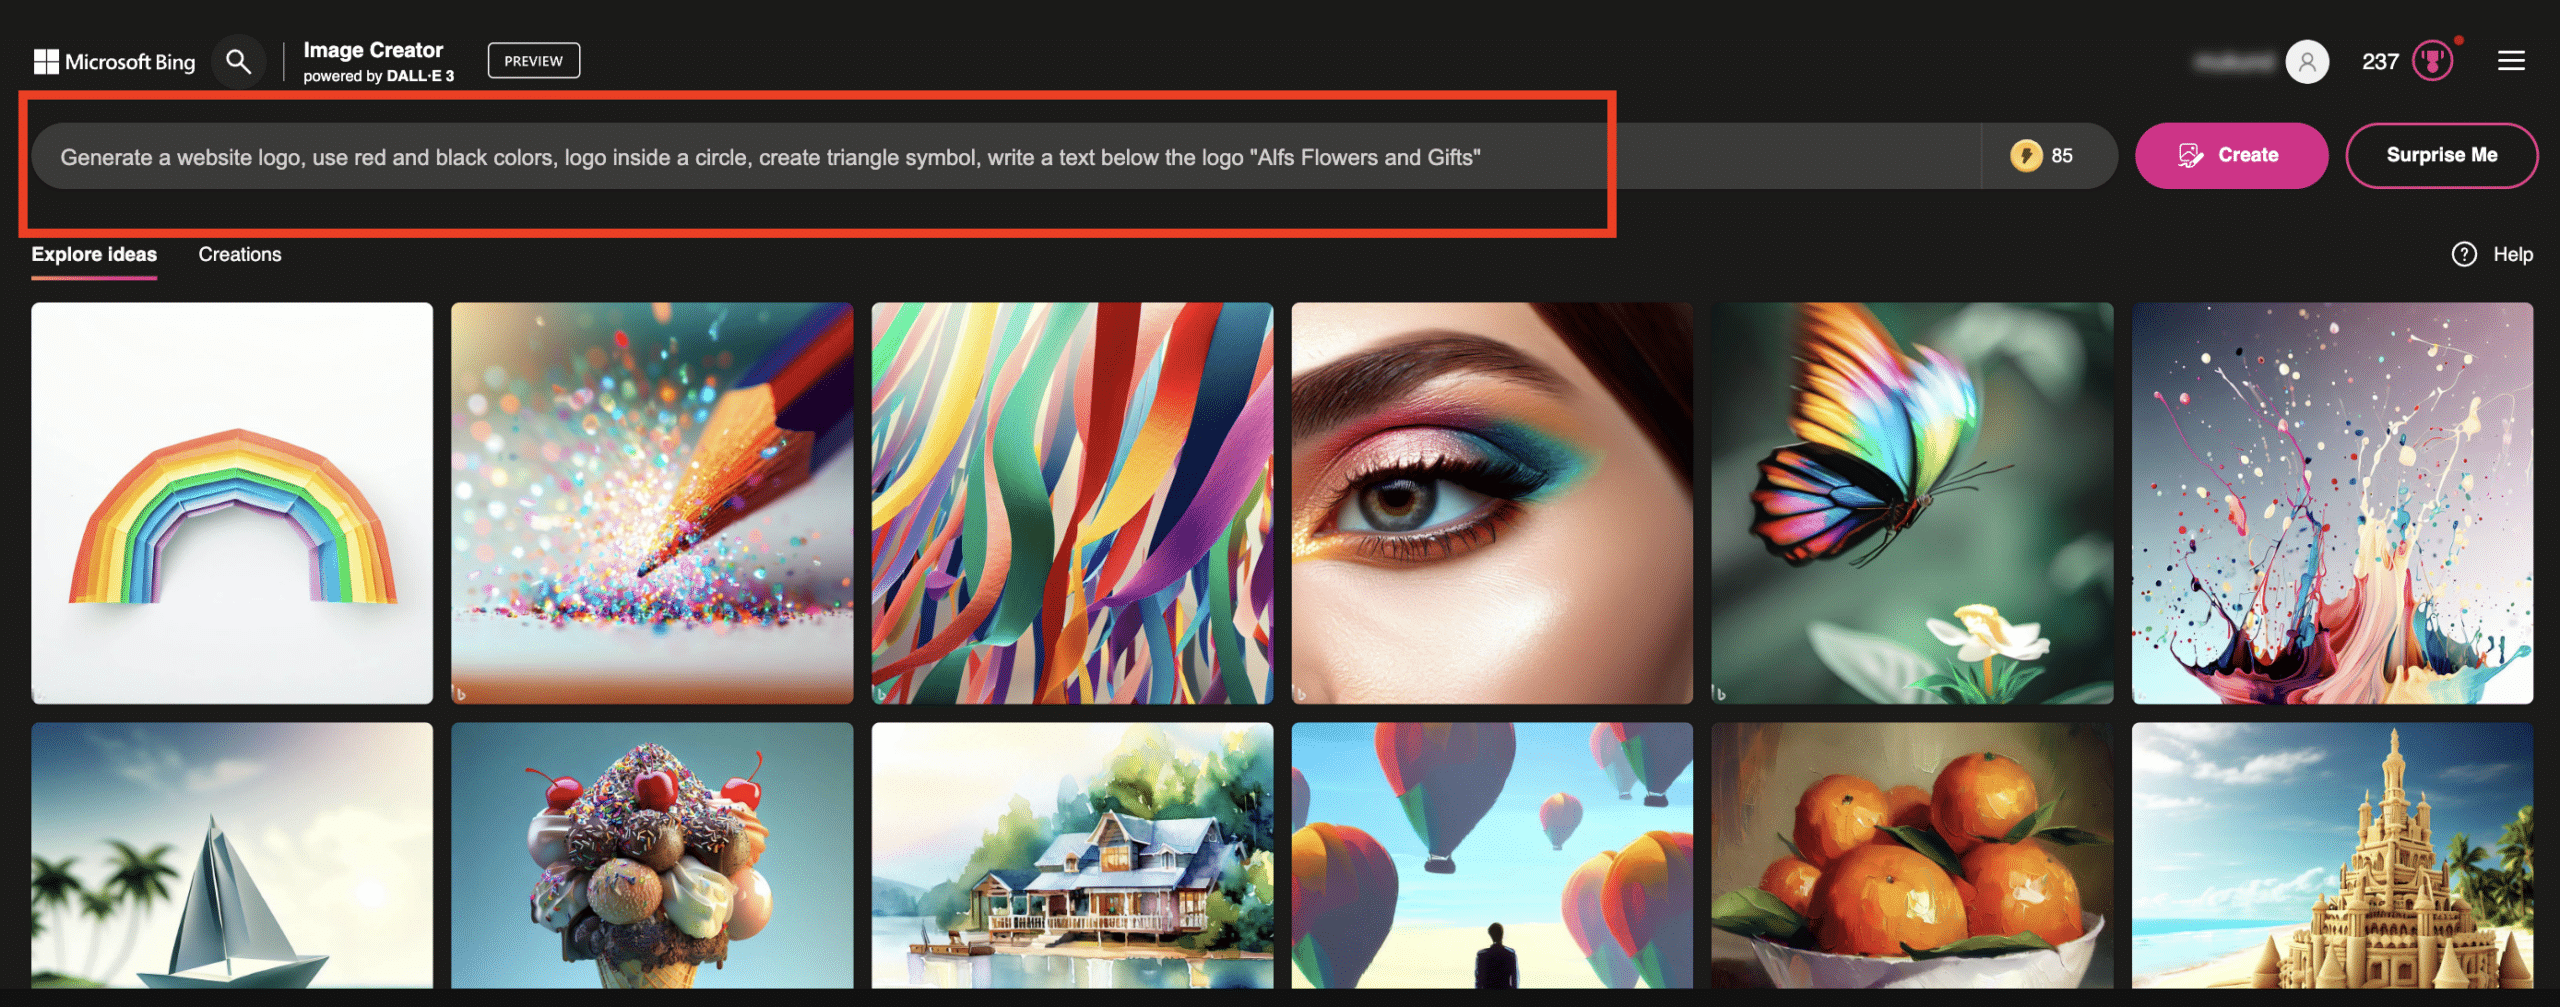 Write prompt for your affiliate website logo in Bing Image Creator powered by DALL-E 3